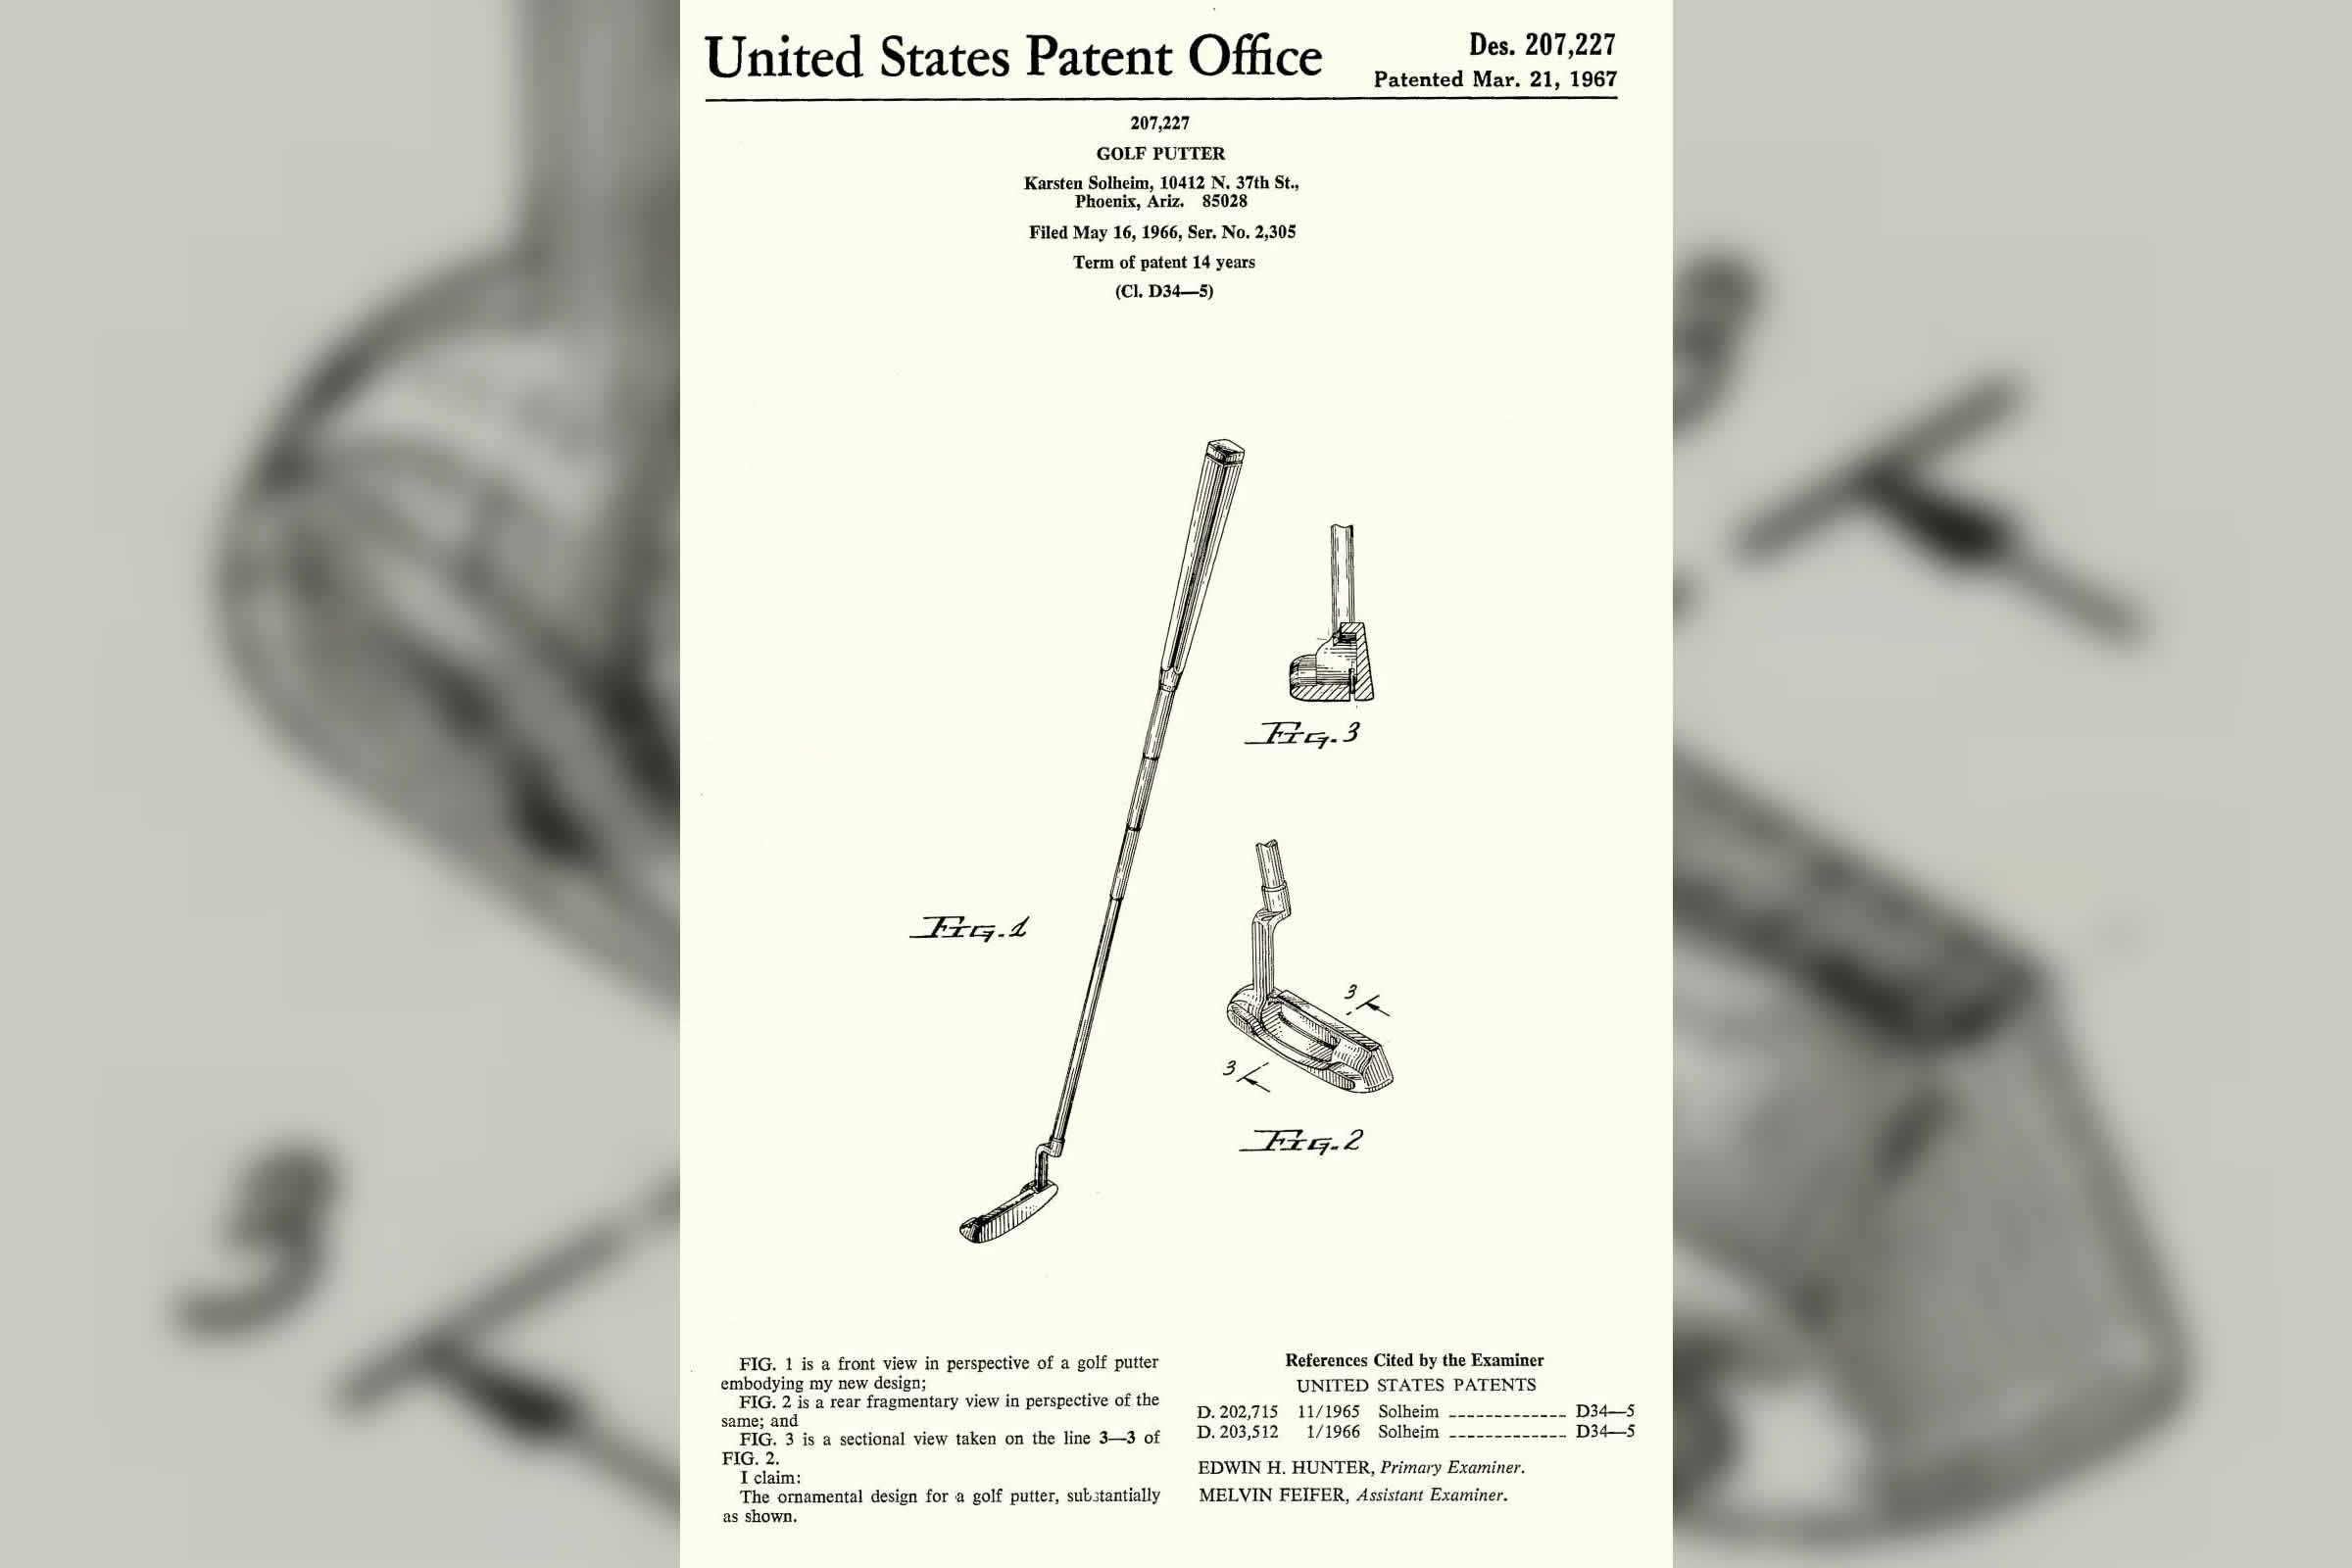 Anser putter drawing submitted for patent